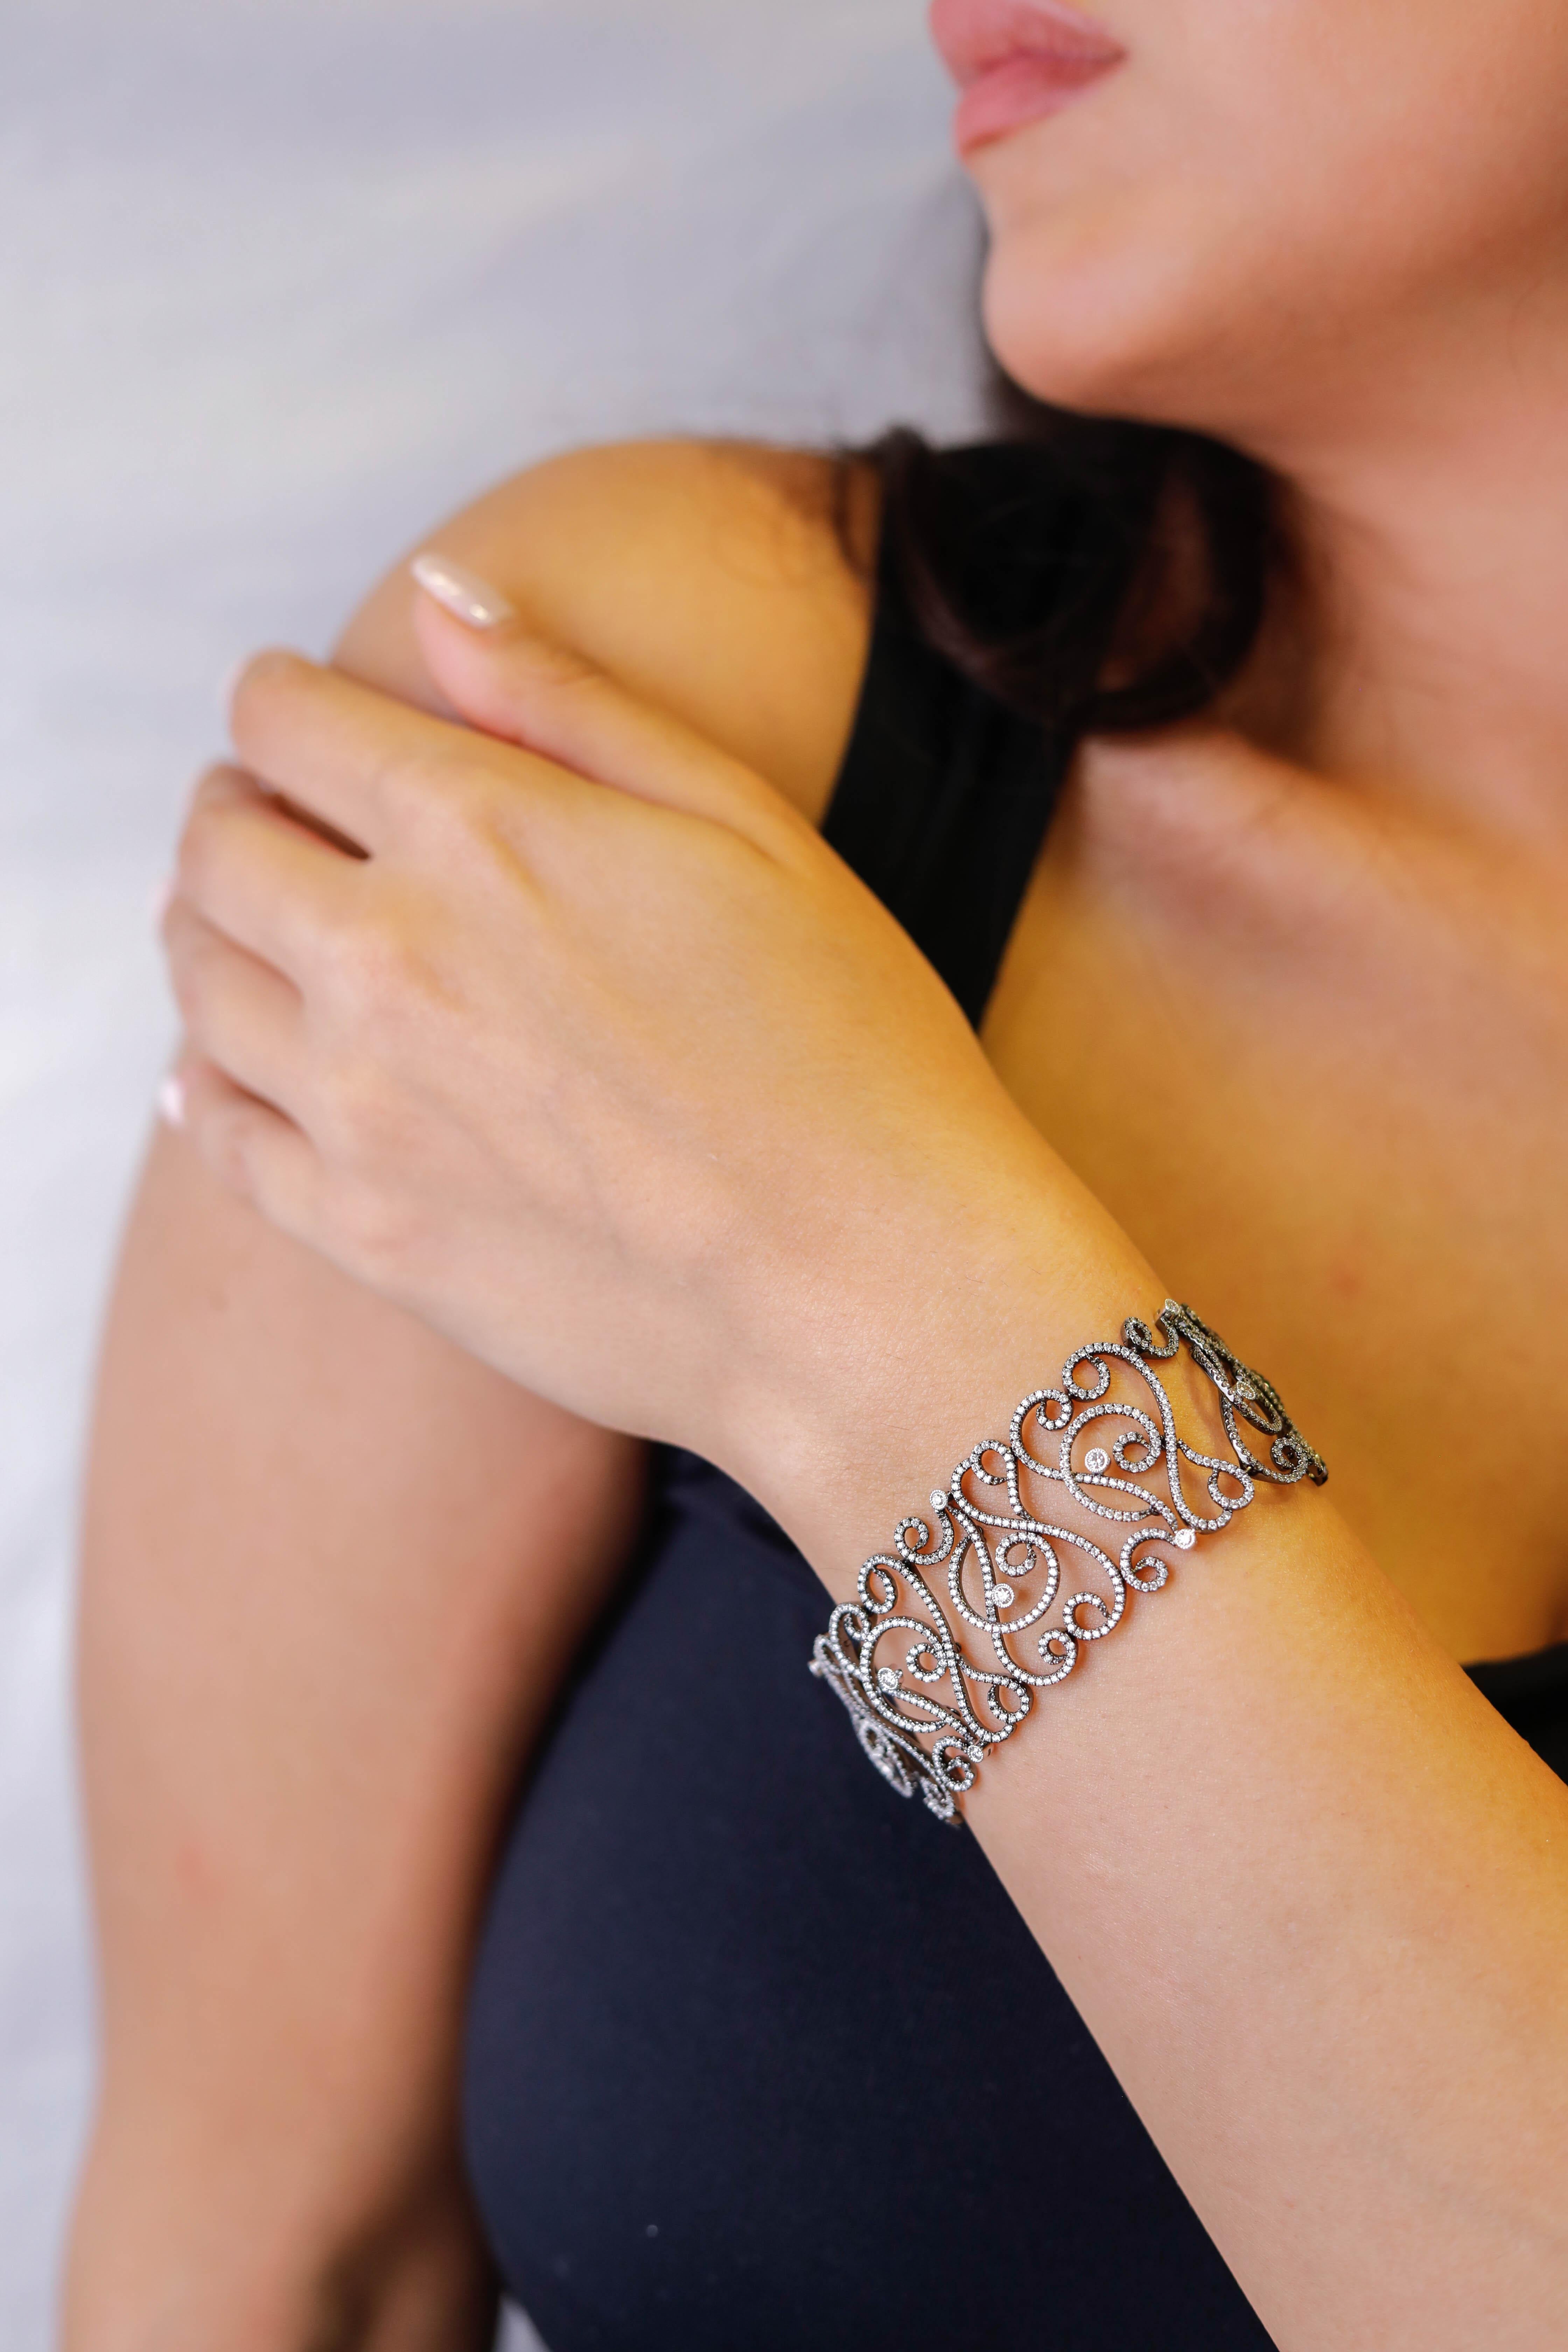 18 Karat White Gold and Platinum Diamond Filigree Bracelet Designer Fine Jewelry

Classic, yet sophisticated design. Crafted in 18k White Gold, this bracelet showcases shimmering diamonds set in a filigree design, creating a dramatic look. Polished